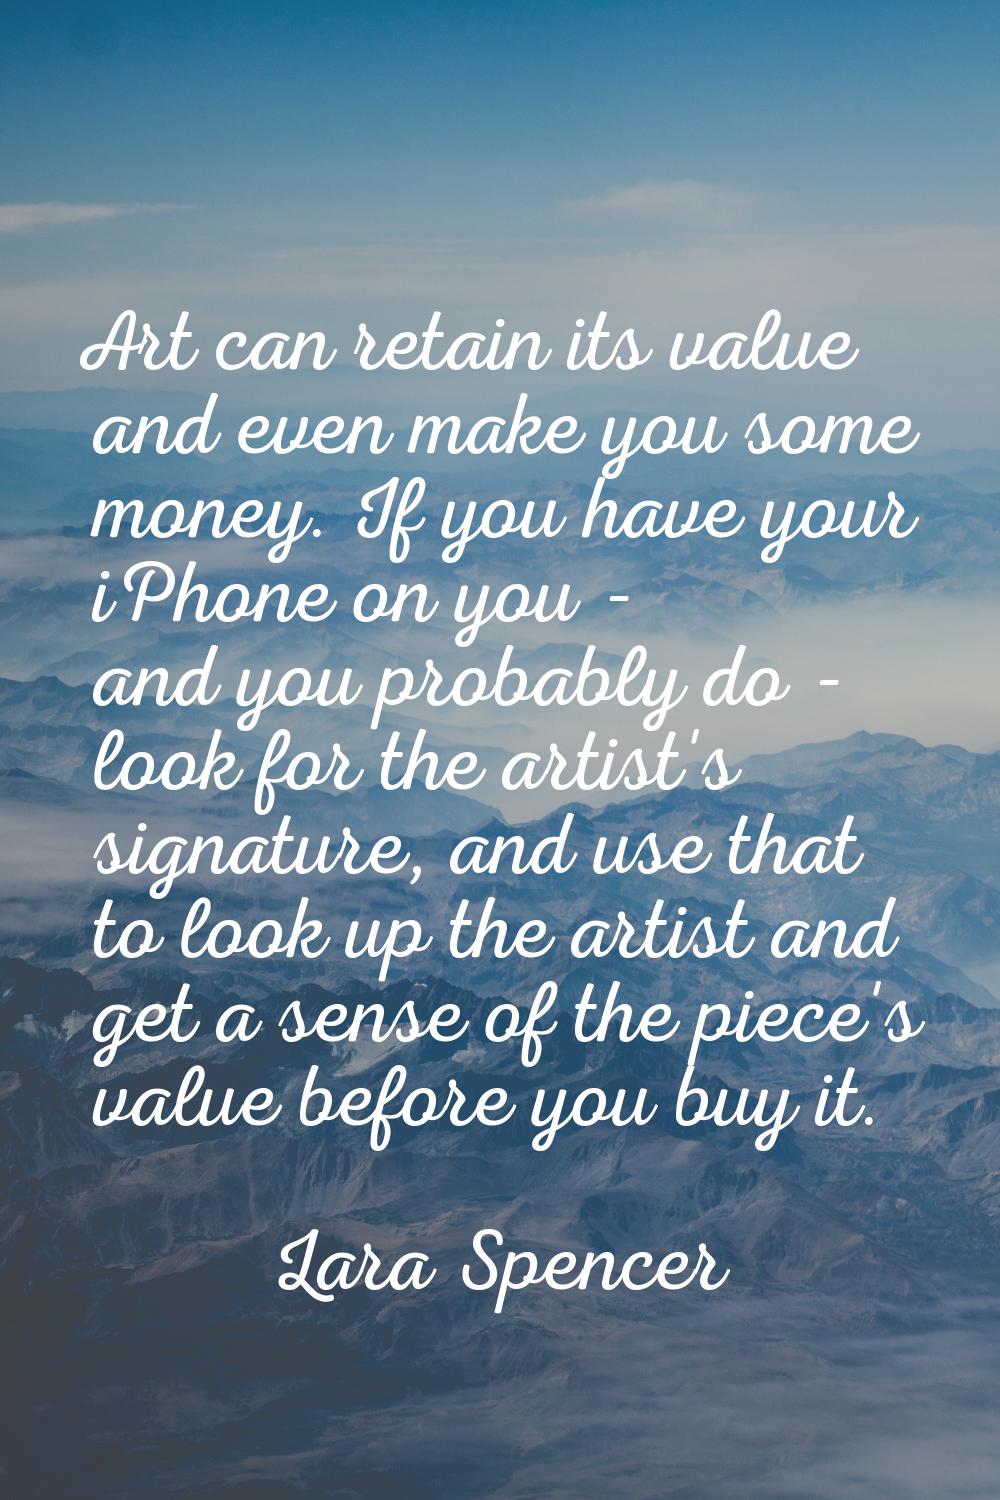 Art can retain its value and even make you some money. If you have your iPhone on you - and you pro